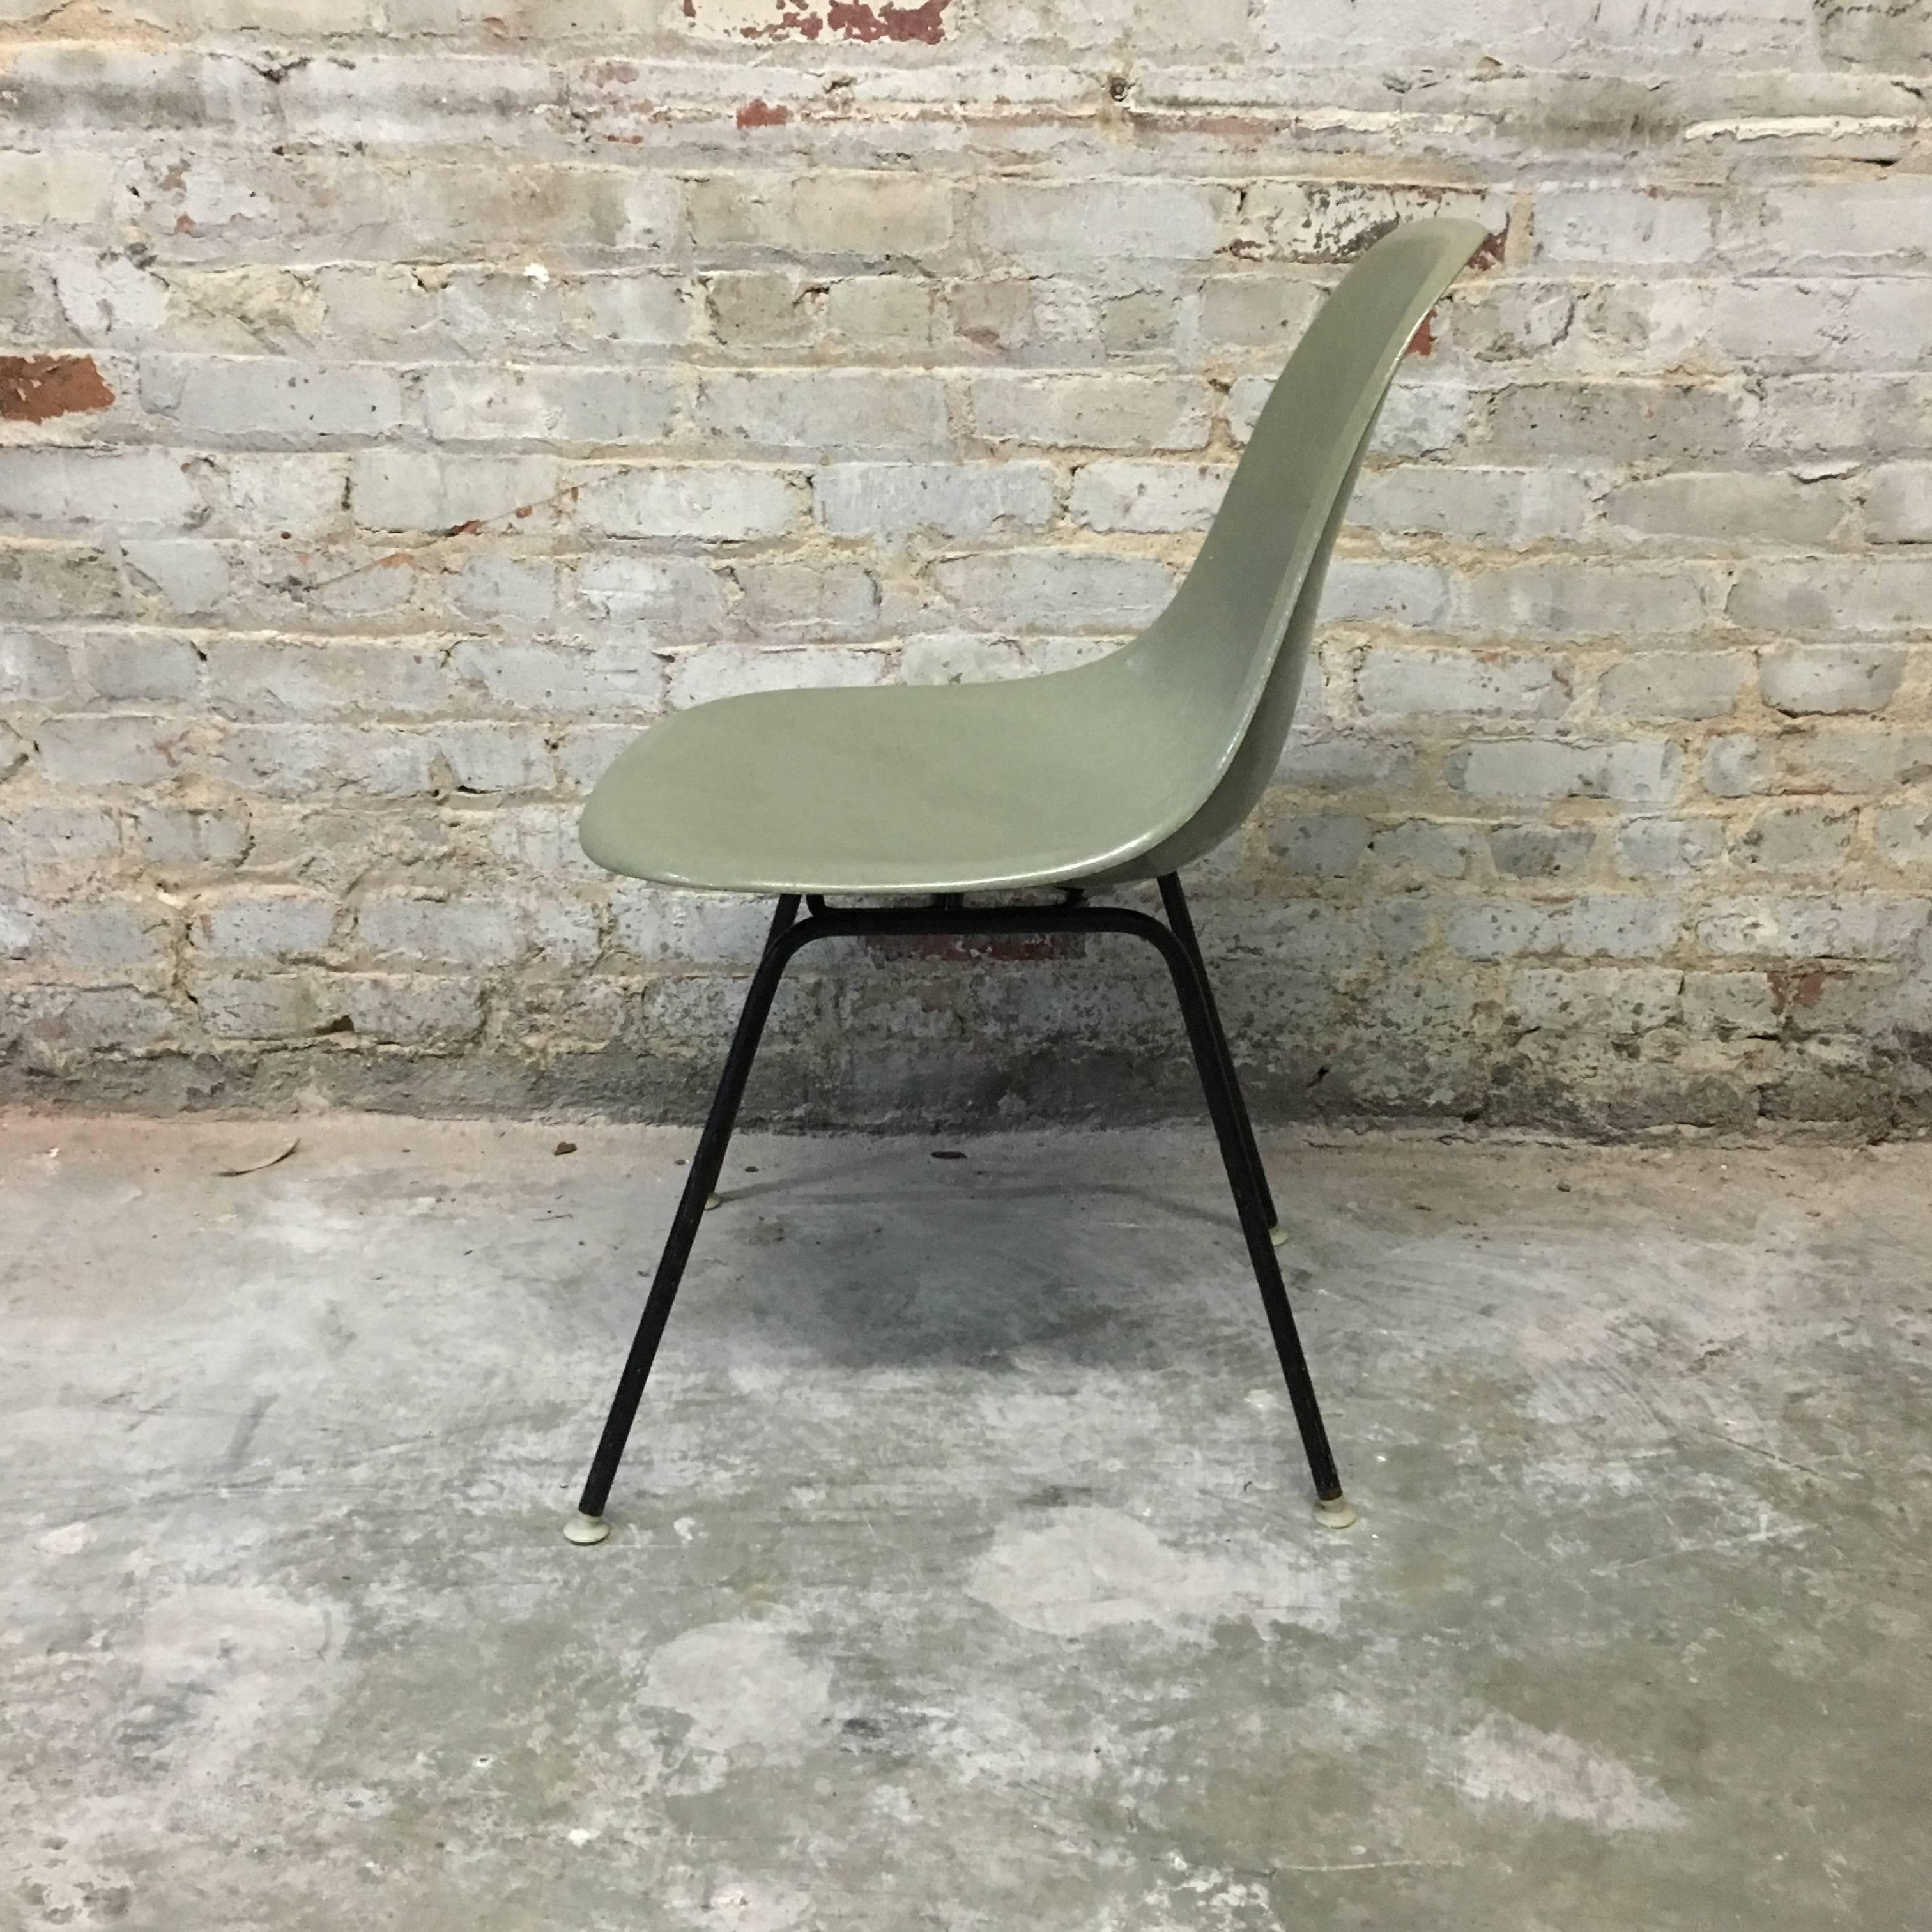 Four Herman Miller Eames Seafoam Green Dining Chairs 2